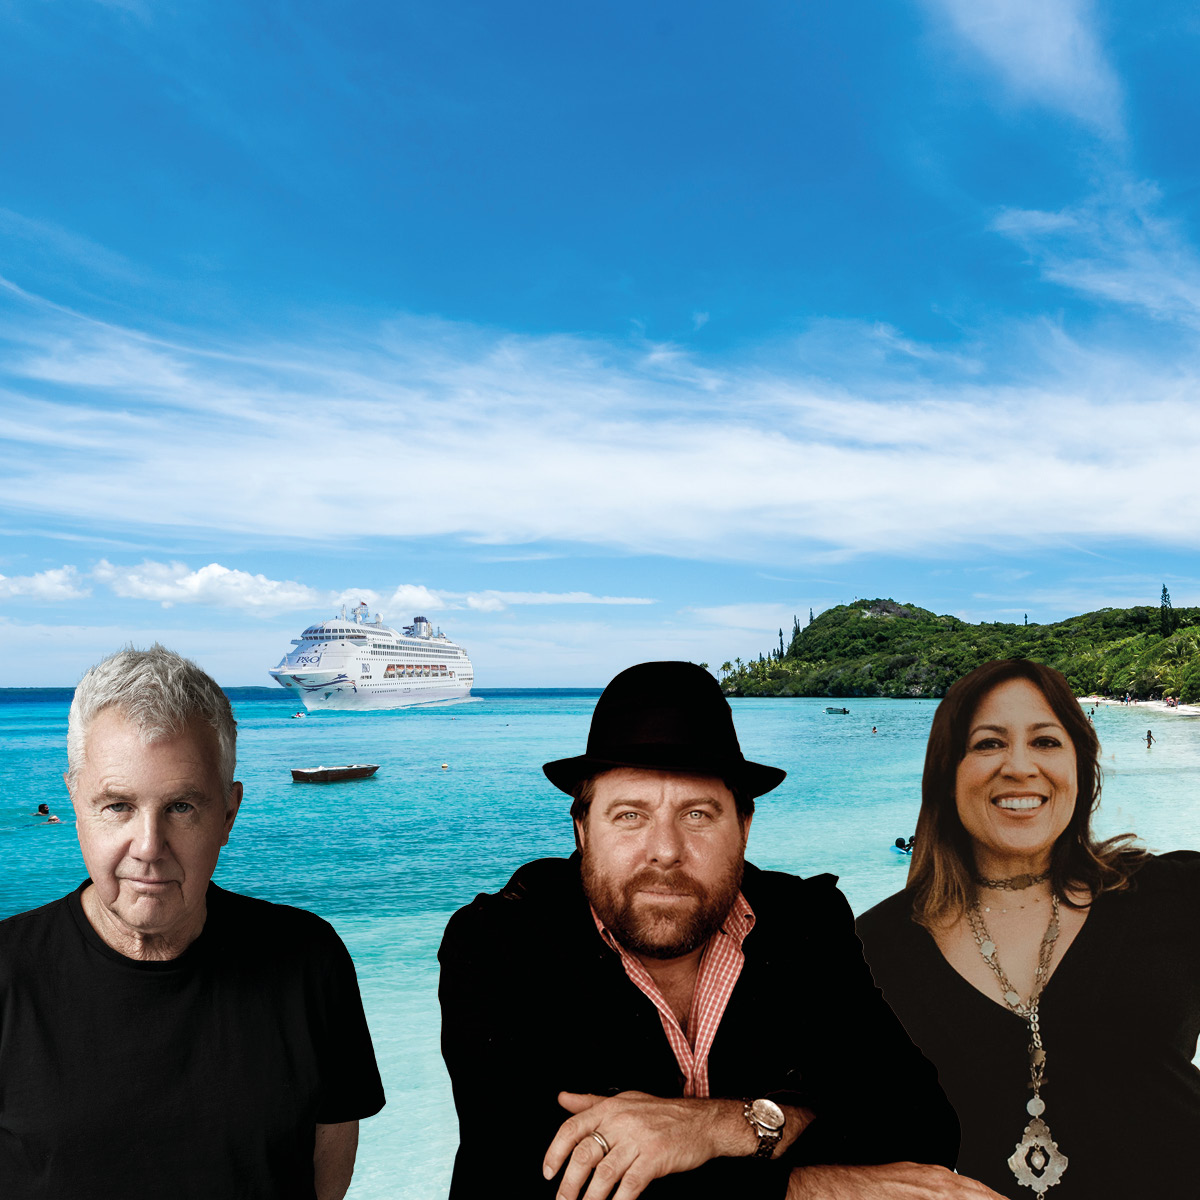 Exclusive performances from Kate Ceberano, Daryl Braithwaite and more onboard Pacific Adventure cruise from $169 pp per night